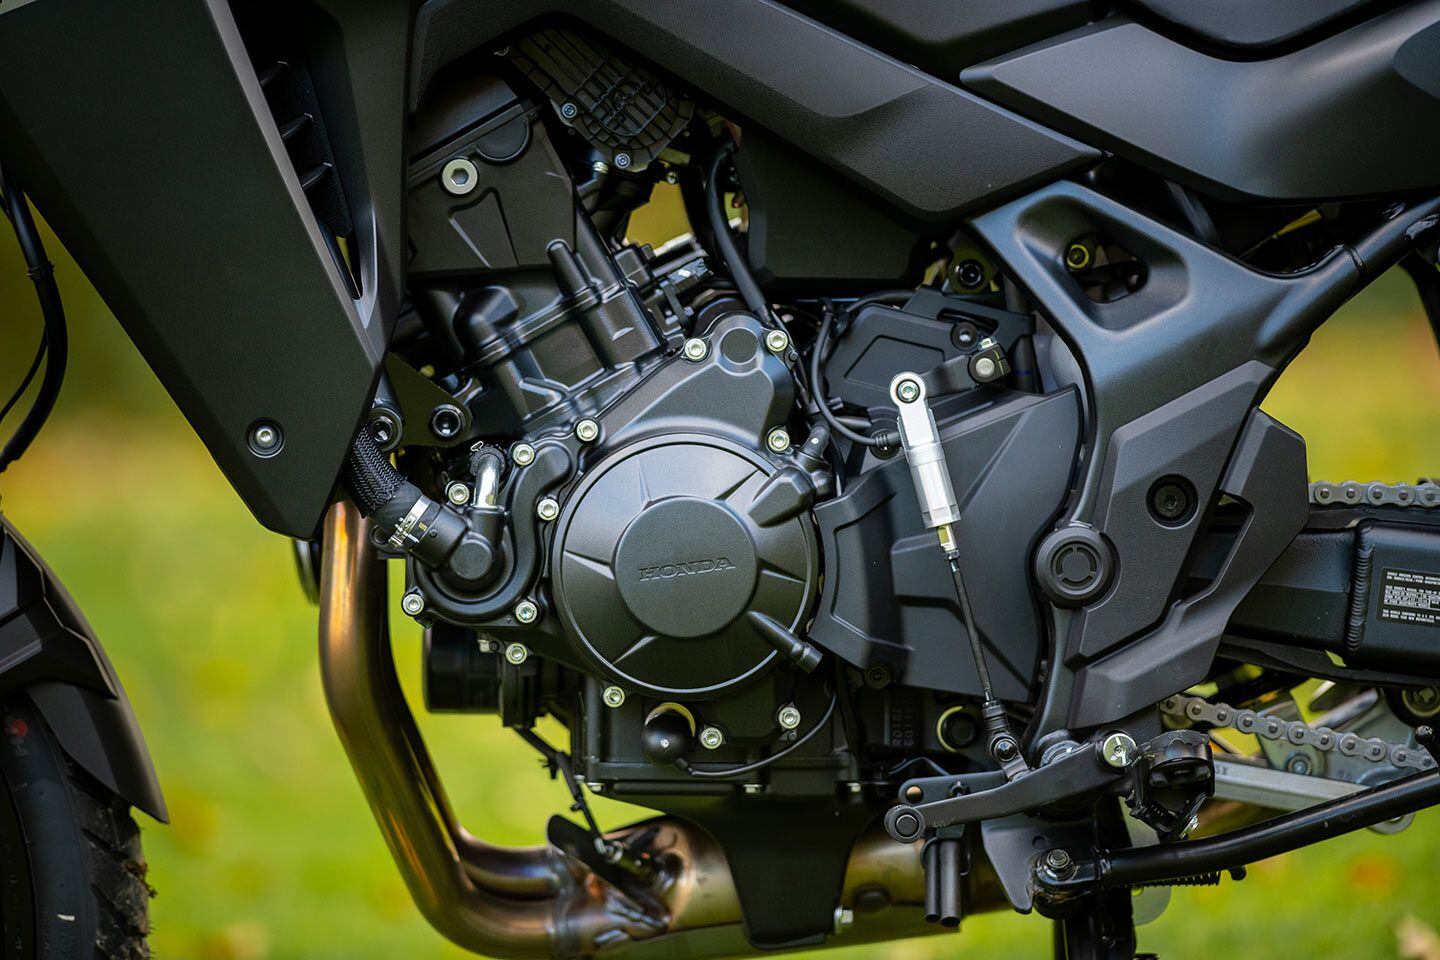 Honda’s 755cc parallel twin with a 270-degree crank and an up-and-down quickshifter.